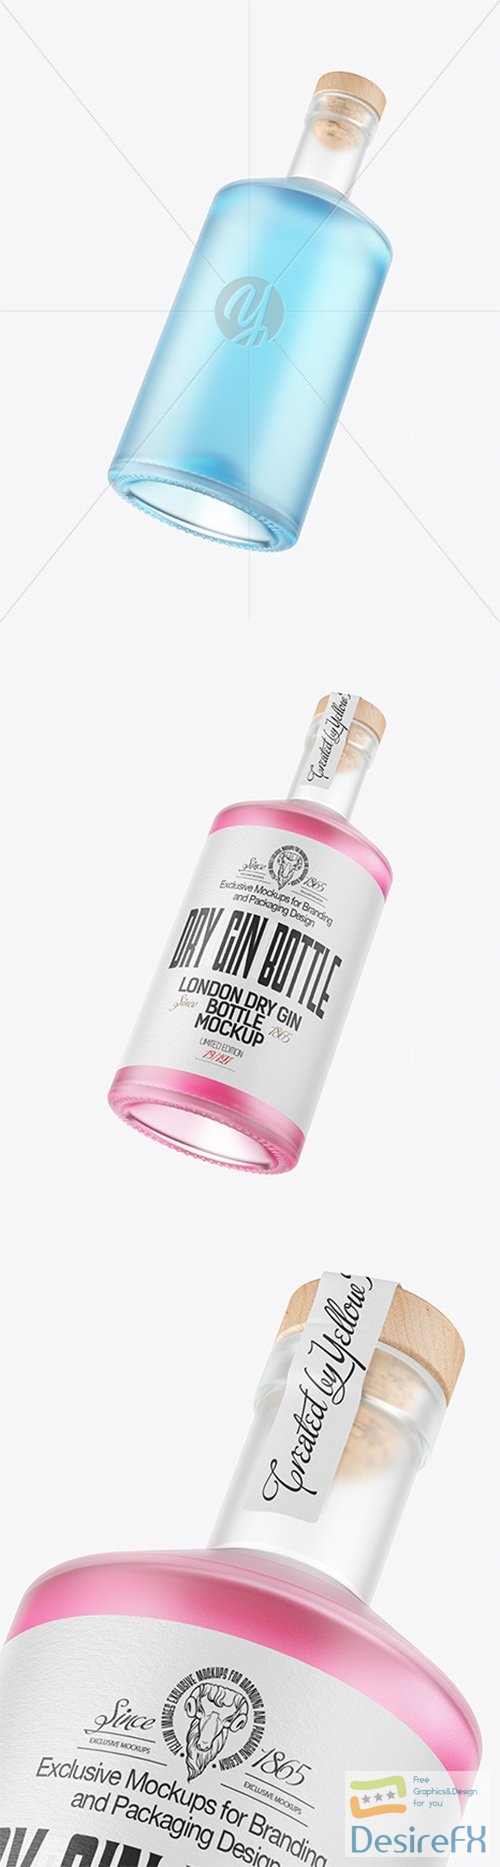 Frosted Glass Gin Bottle Mockup 82117 TIF